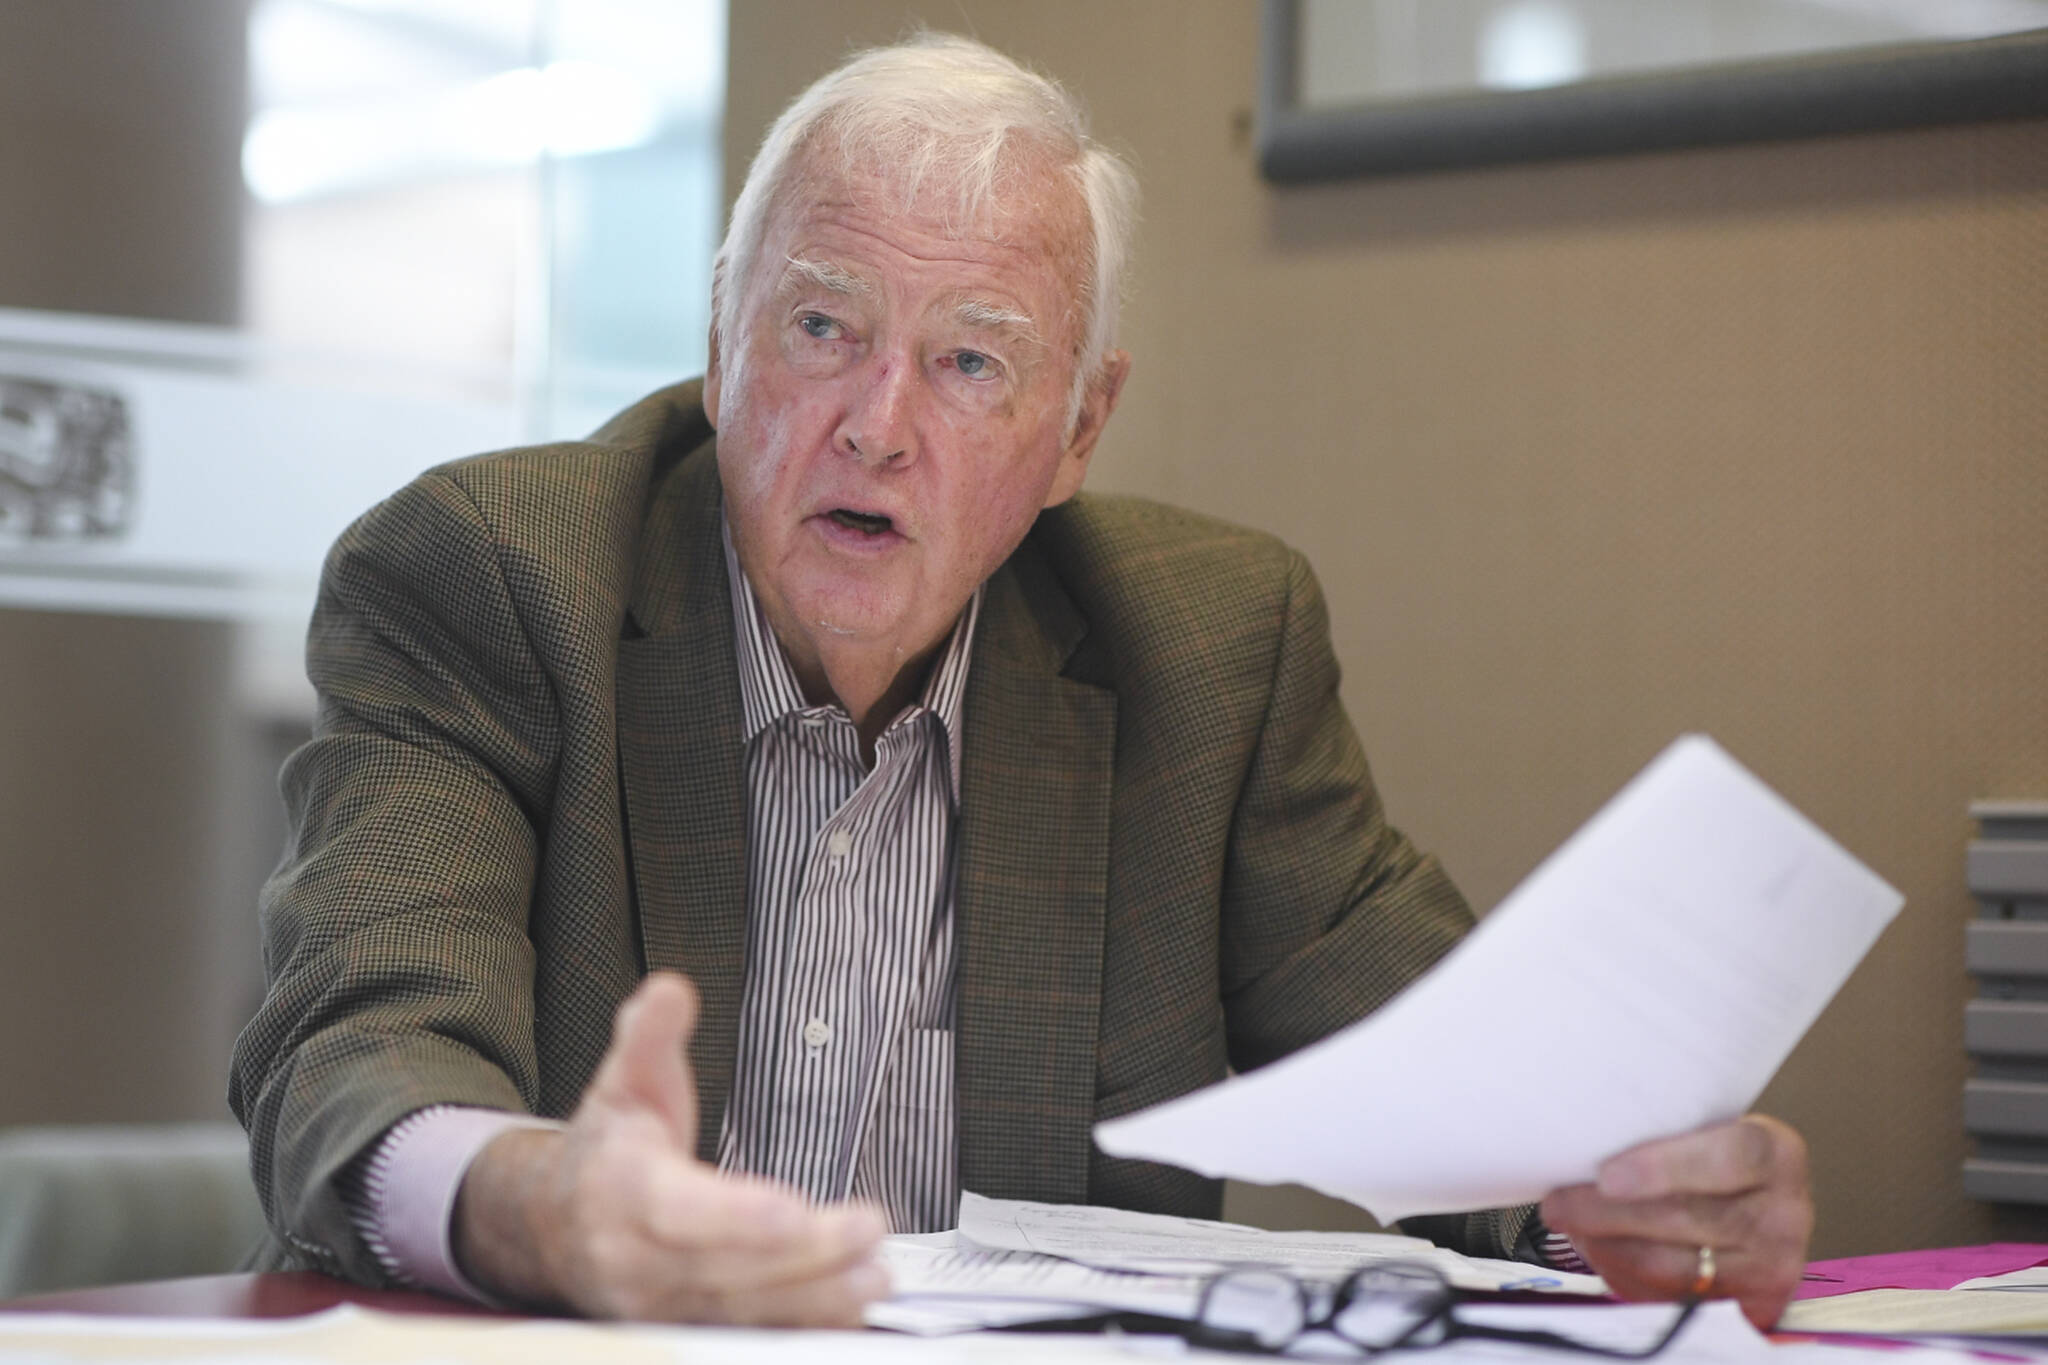 Former Gov. Frank Murkowski speaks on a range of subjects during an interview with the Juneau Empire in May 2019. (Michael Penn/Juneau Empire File)